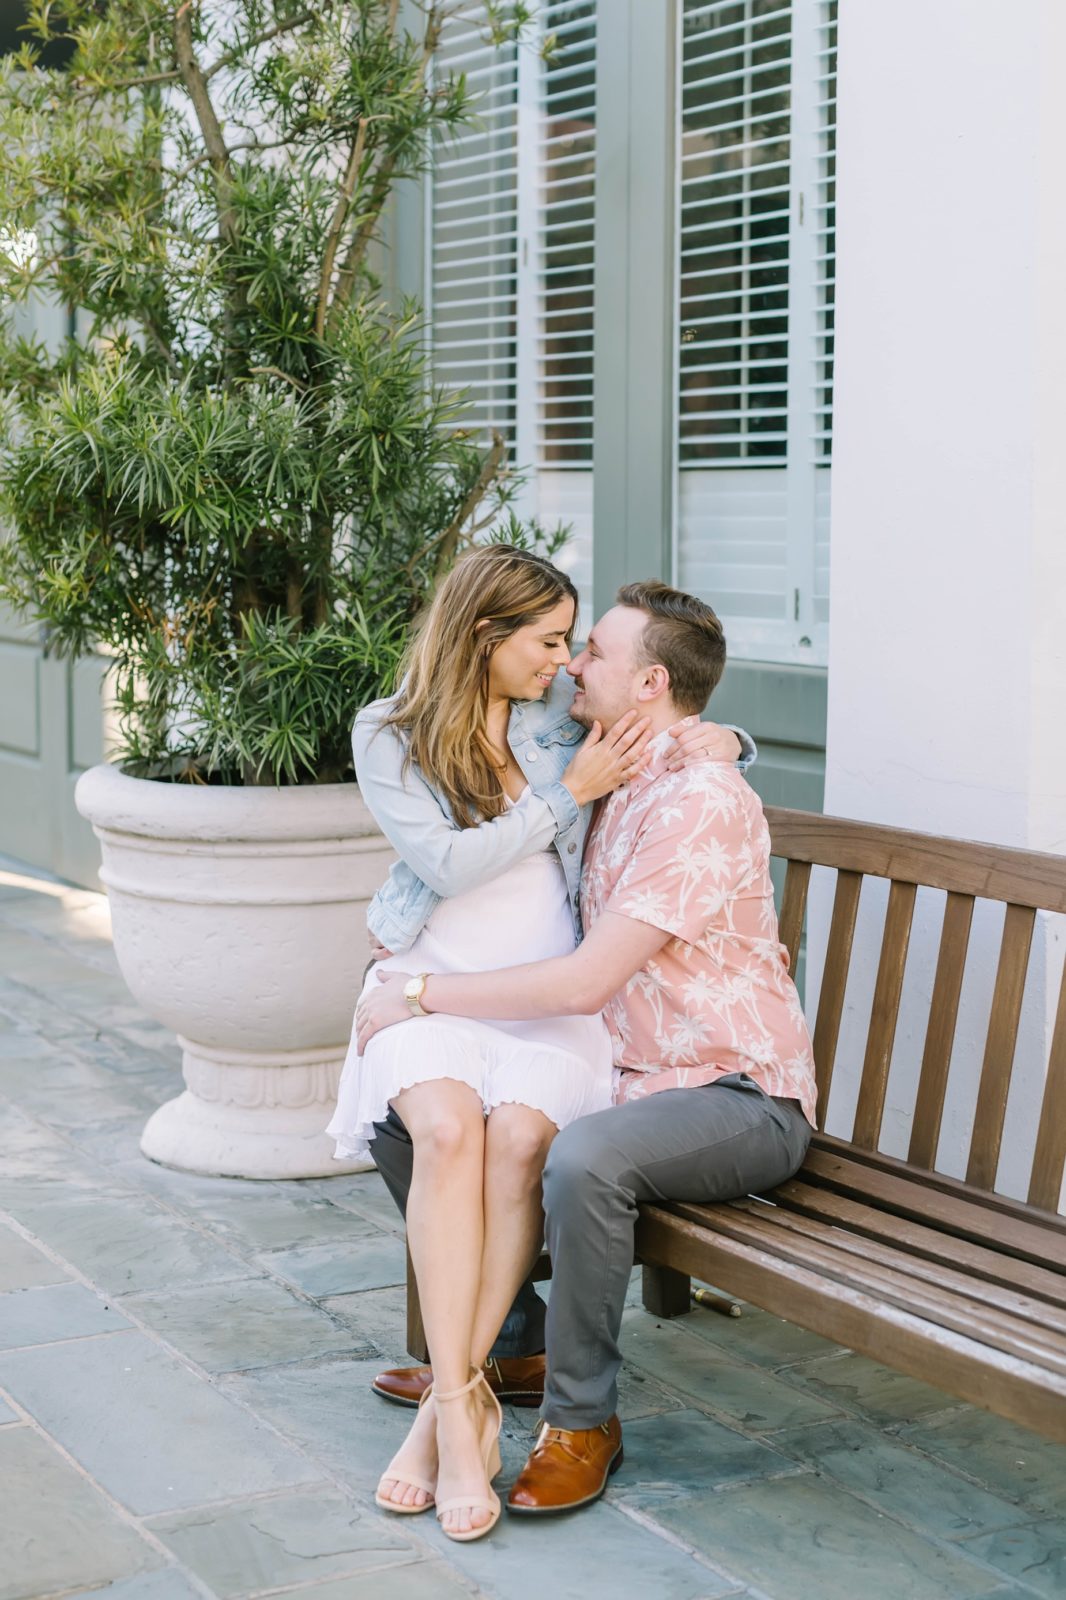 Woman sits on her fiances lap on a bench in Texas by Christina Elliott Photography. white dress and levi jacket button-up #ChristinaElliottPhotography #ChristinaElliottEngagements #TheTremontHouse #Texasengagements #shesaidyes